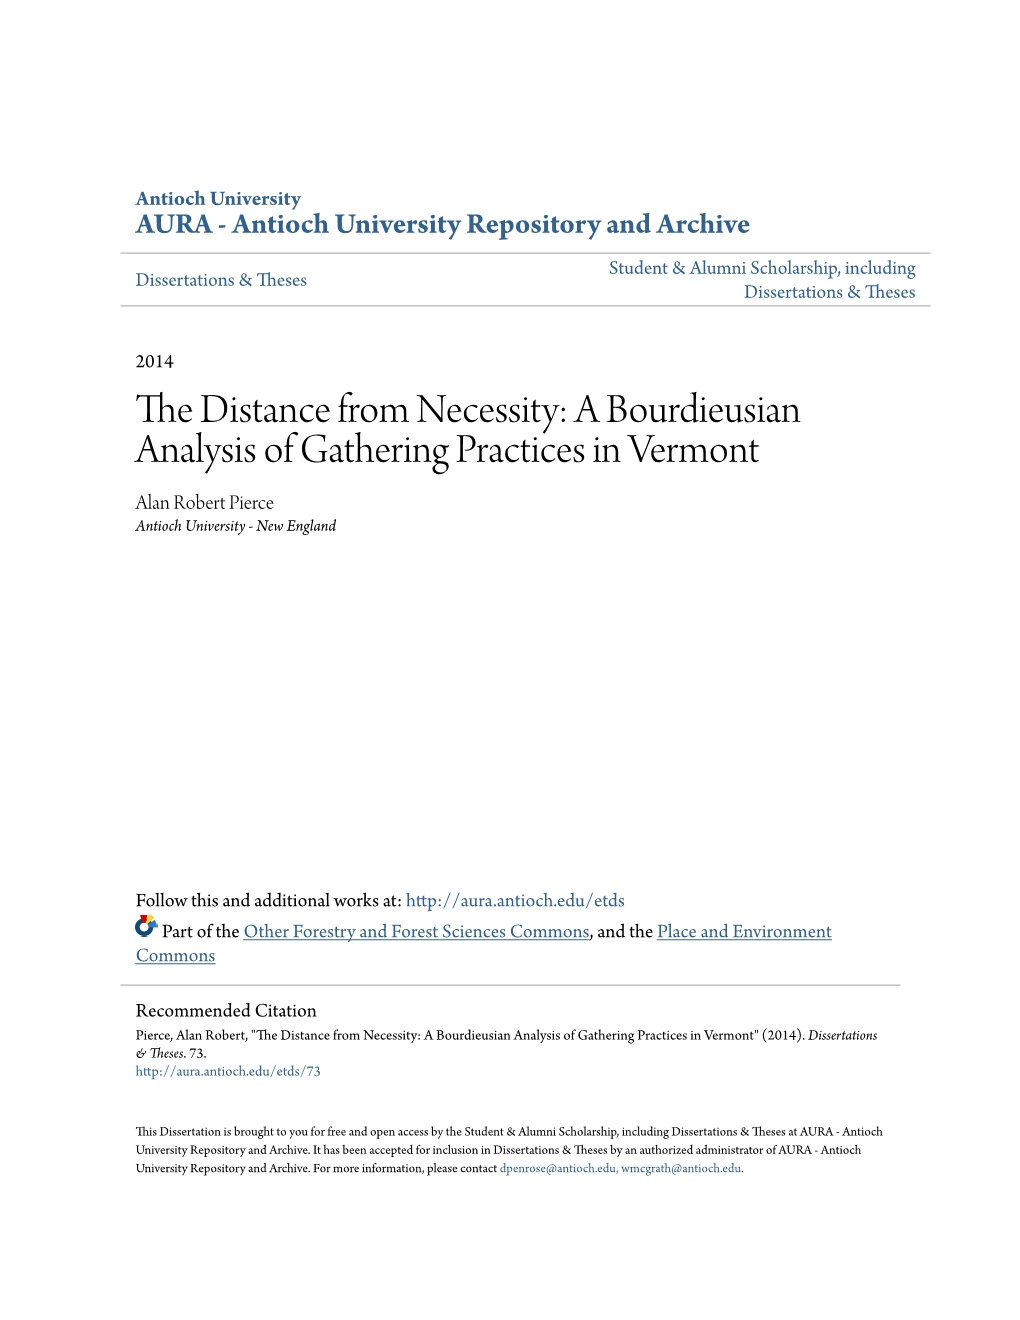 The Distance from Necessity: a Bourdieusian Analysis of Gathering Practices in Vermont Alan Robert Pierce Antioch University - New England